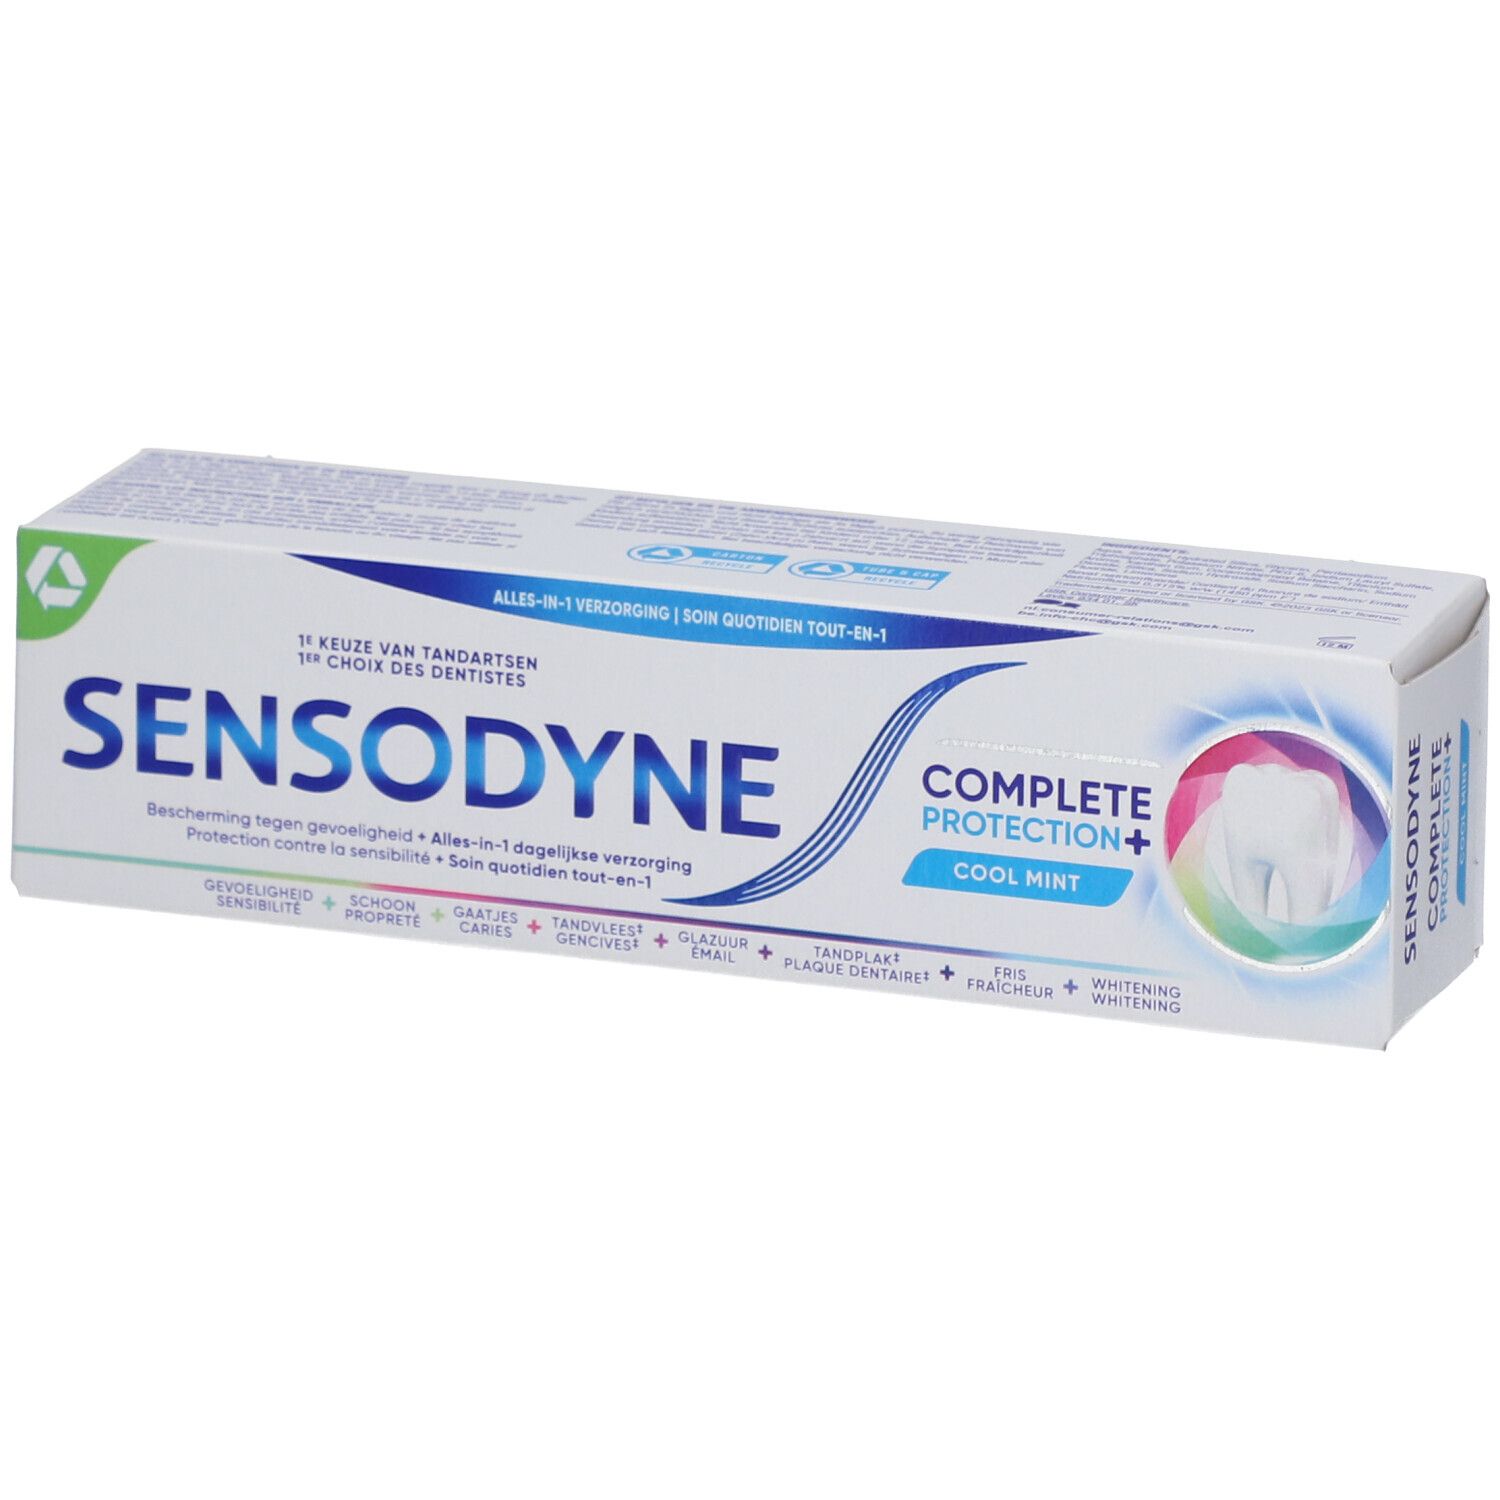 Sensodyne Complete Protection+ Cool Mint Dentifrice 75 ml